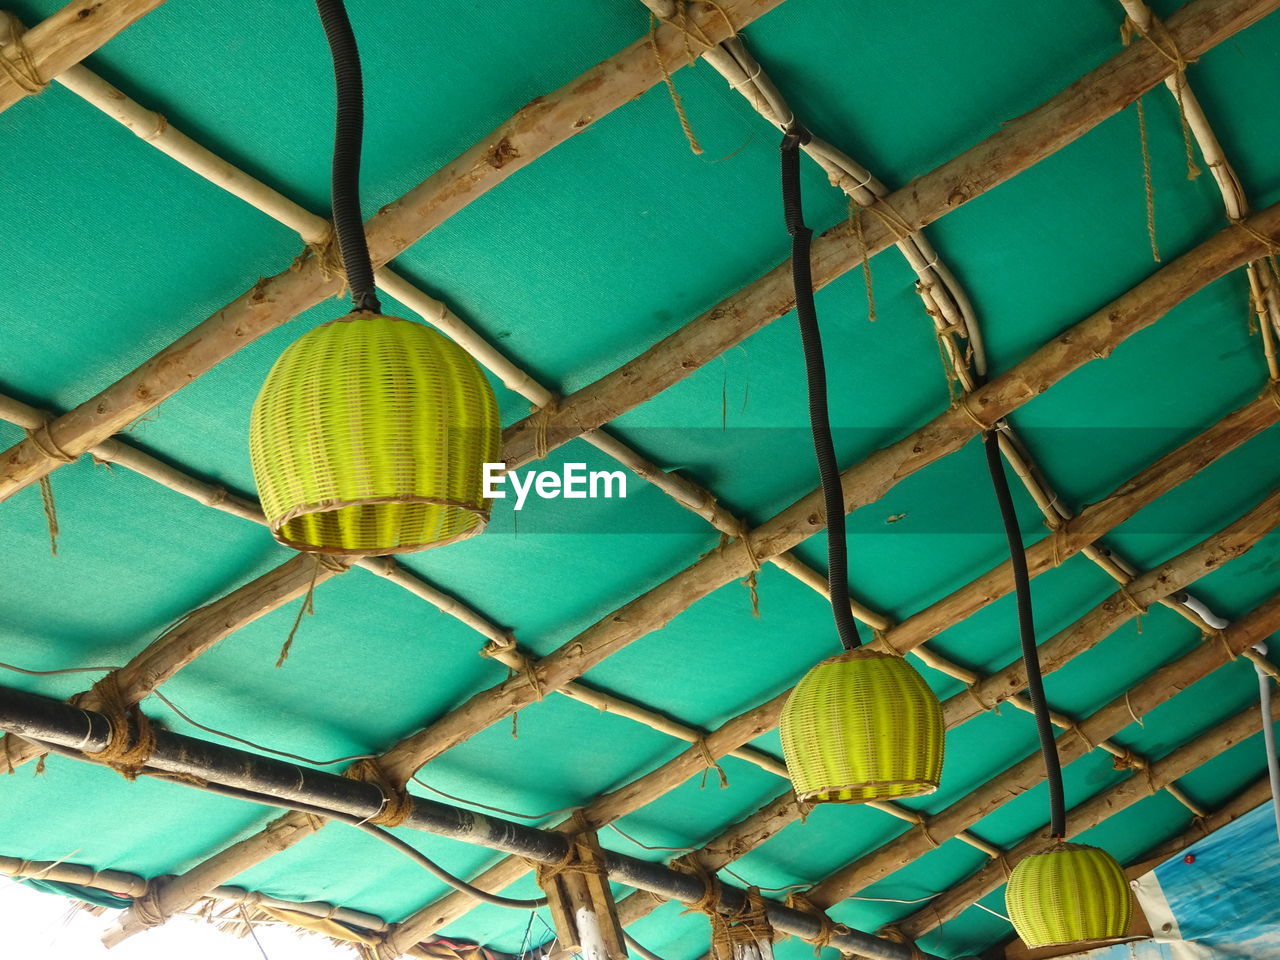 Low angle view of lantern hanging on ceiling